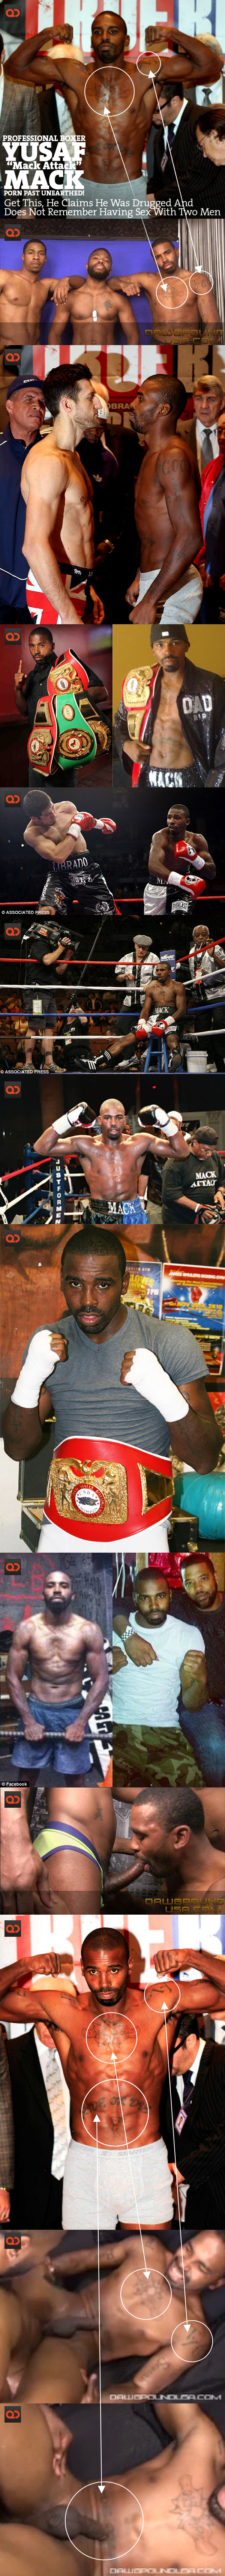 Xxx Vidio On Boxing Stag - Professional Boxer Yusaf â€œMack Attackâ€ Mack Porn Past Unearthed! Claims He  Was Drugged, Does Not Remember Having Sex With Two Men - QueerClick